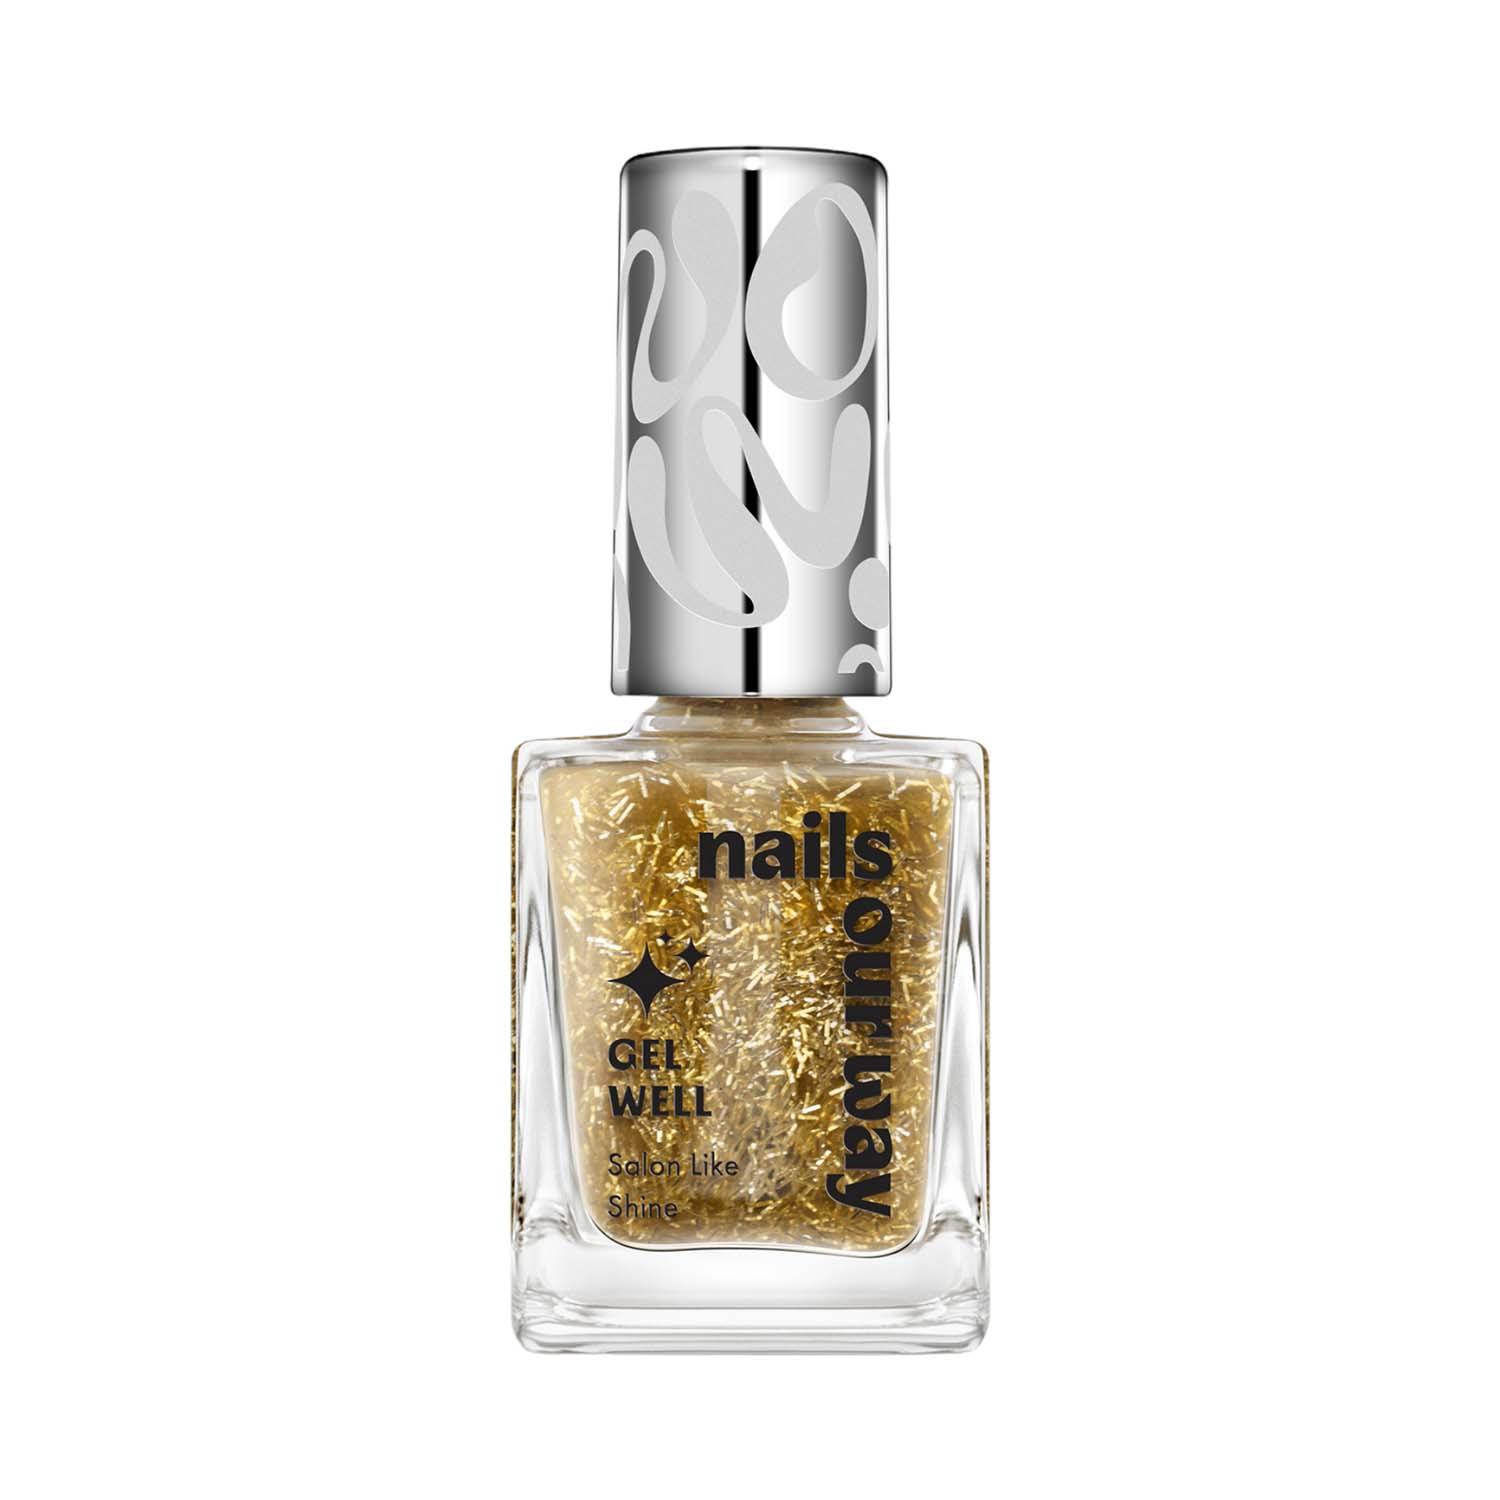 Nails Our Way | Nails Our Way Gel Well Nail Enamel - 604 Dazzling (10 ml)